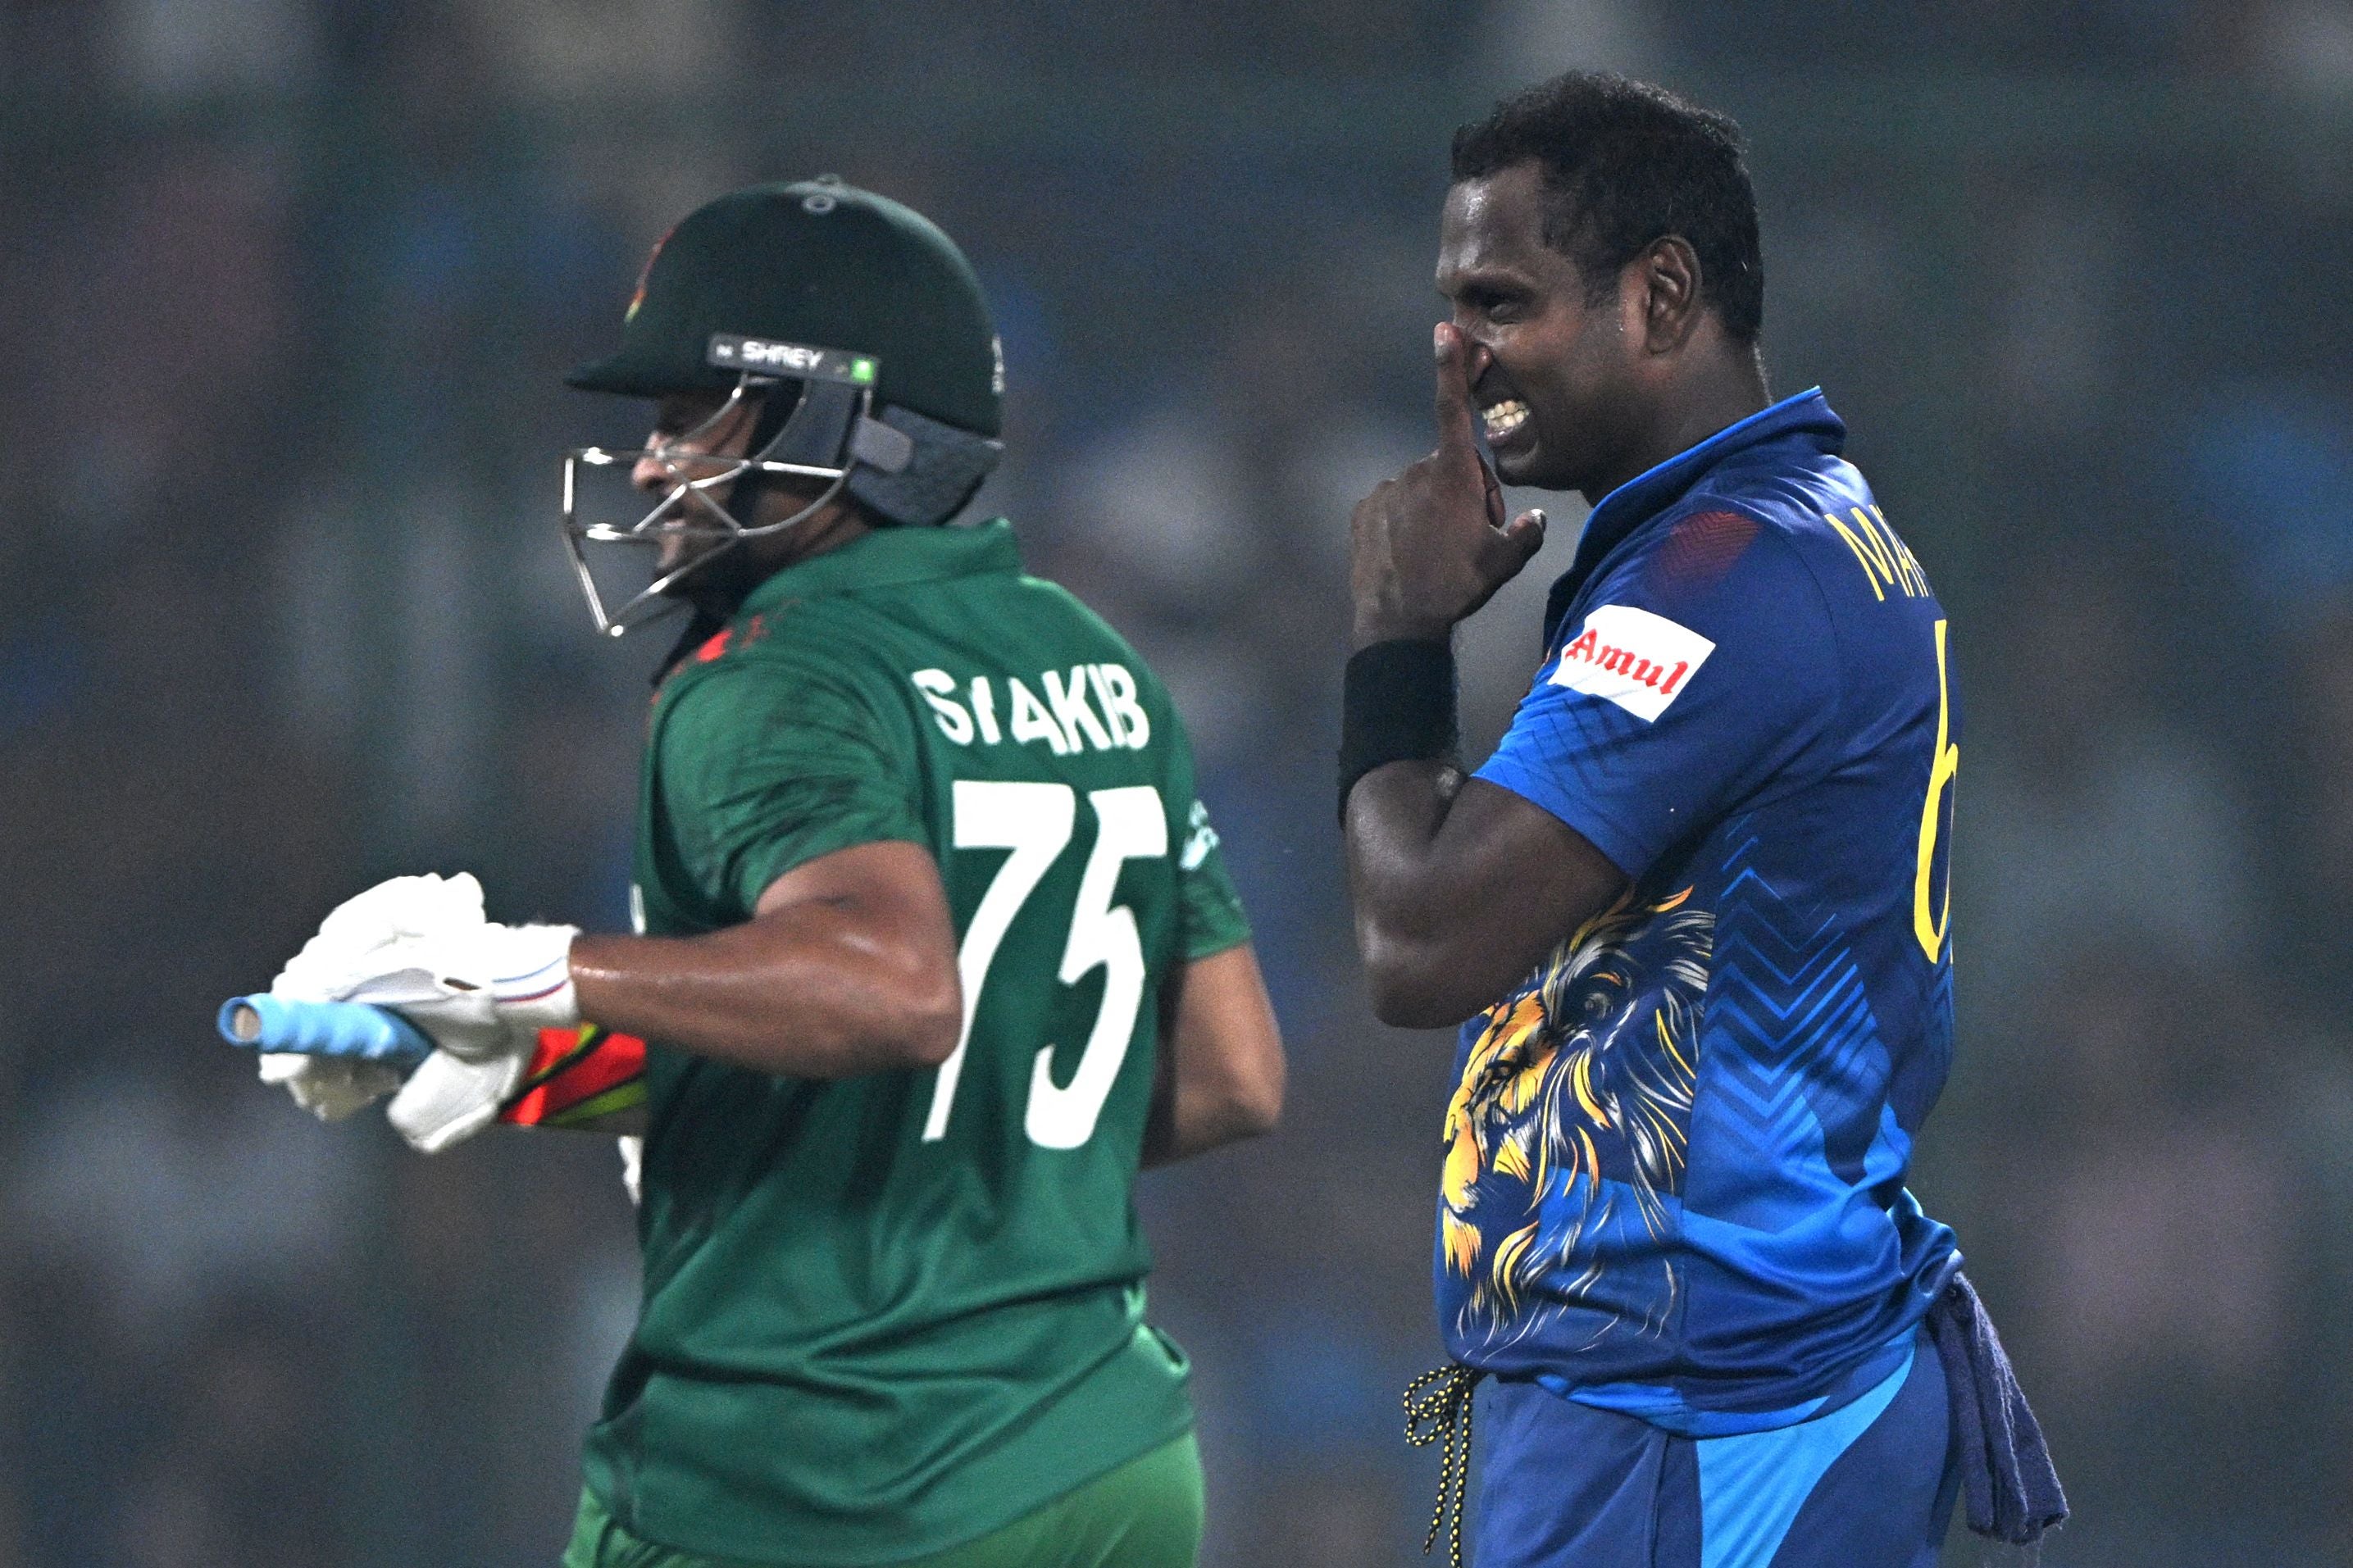 Mathews and Shakib Al Hasan exchanged words in the post match interviews about the controversial incident